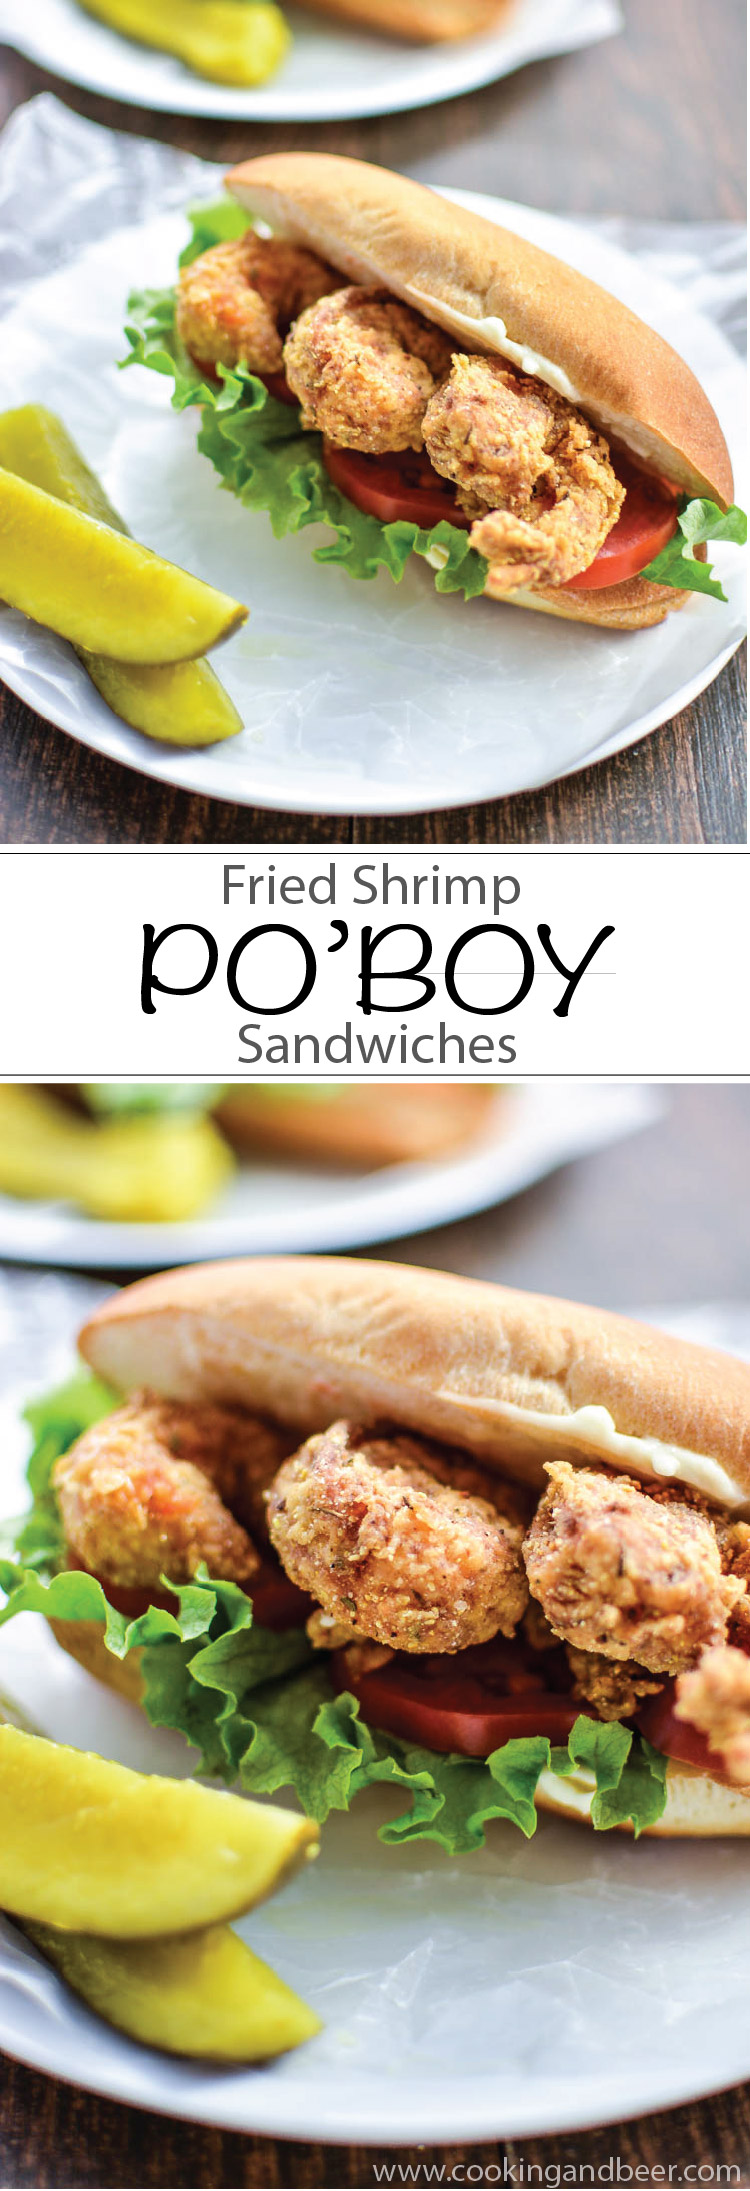 Fried Shrimp Po'Boy SandwichesCooking and Beer